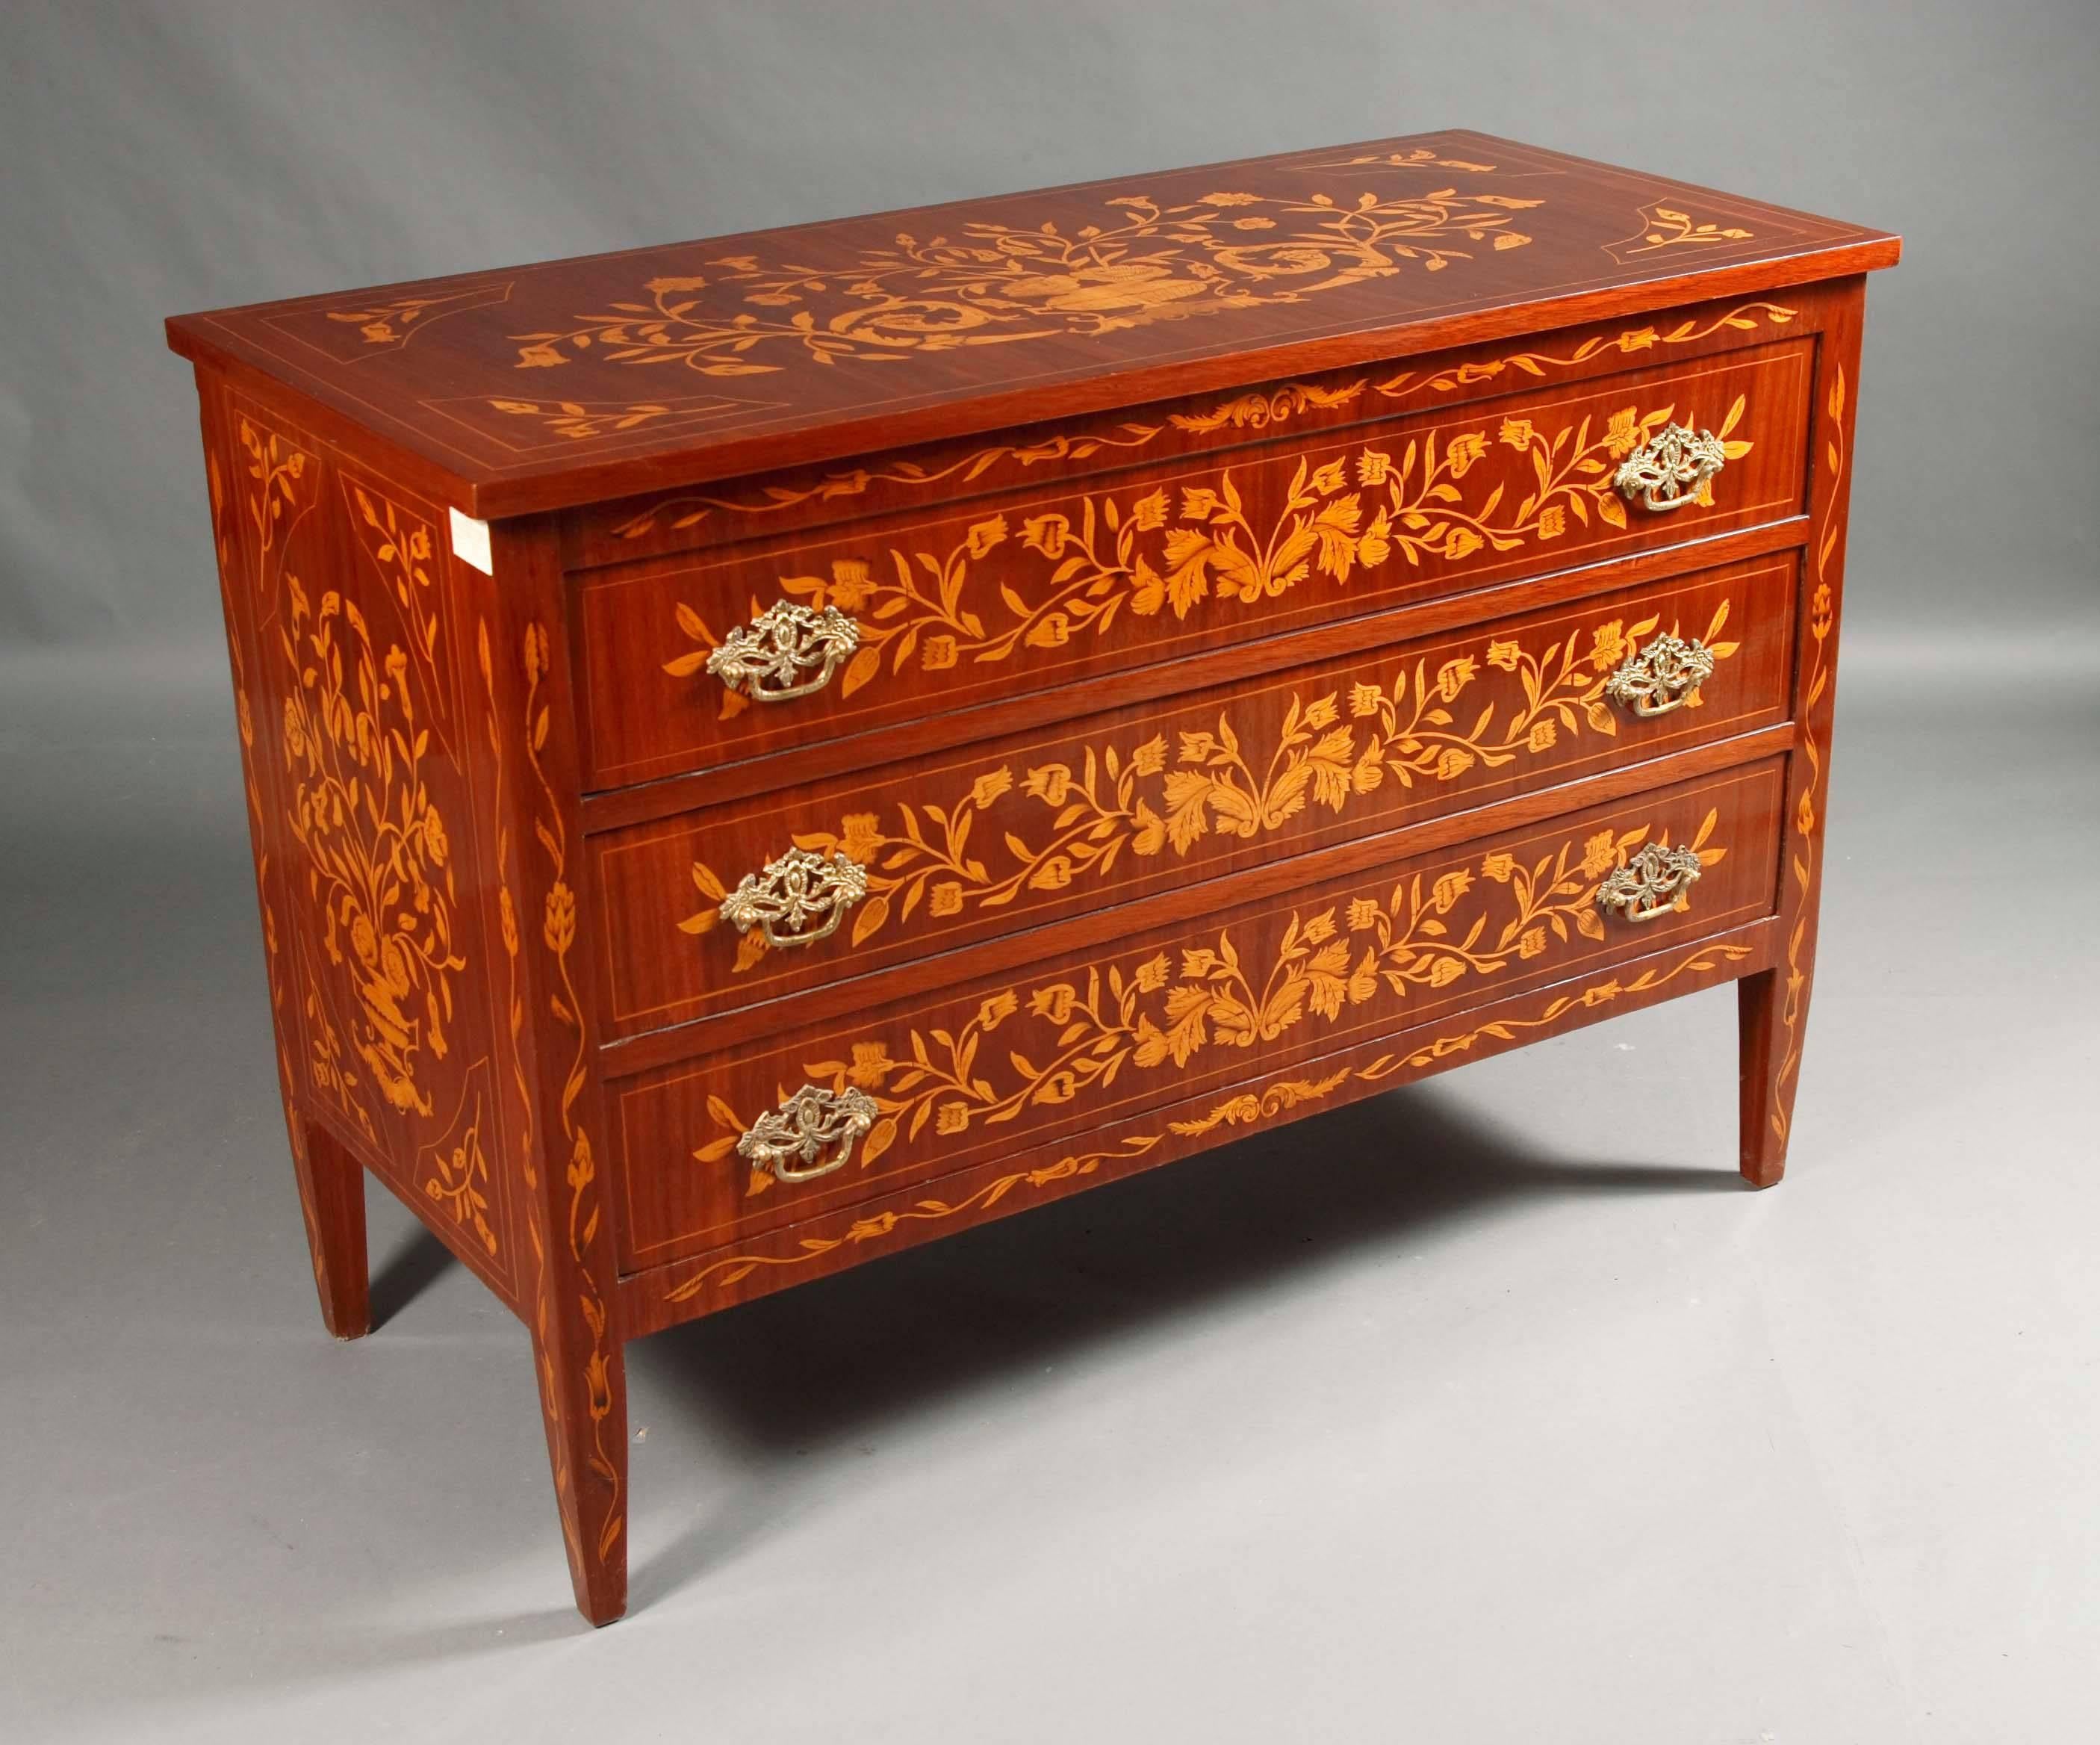 Marquetry Inlaid Commode in Neoclassical Style, Mahagony and Maple Veneer (Neoklassisch)